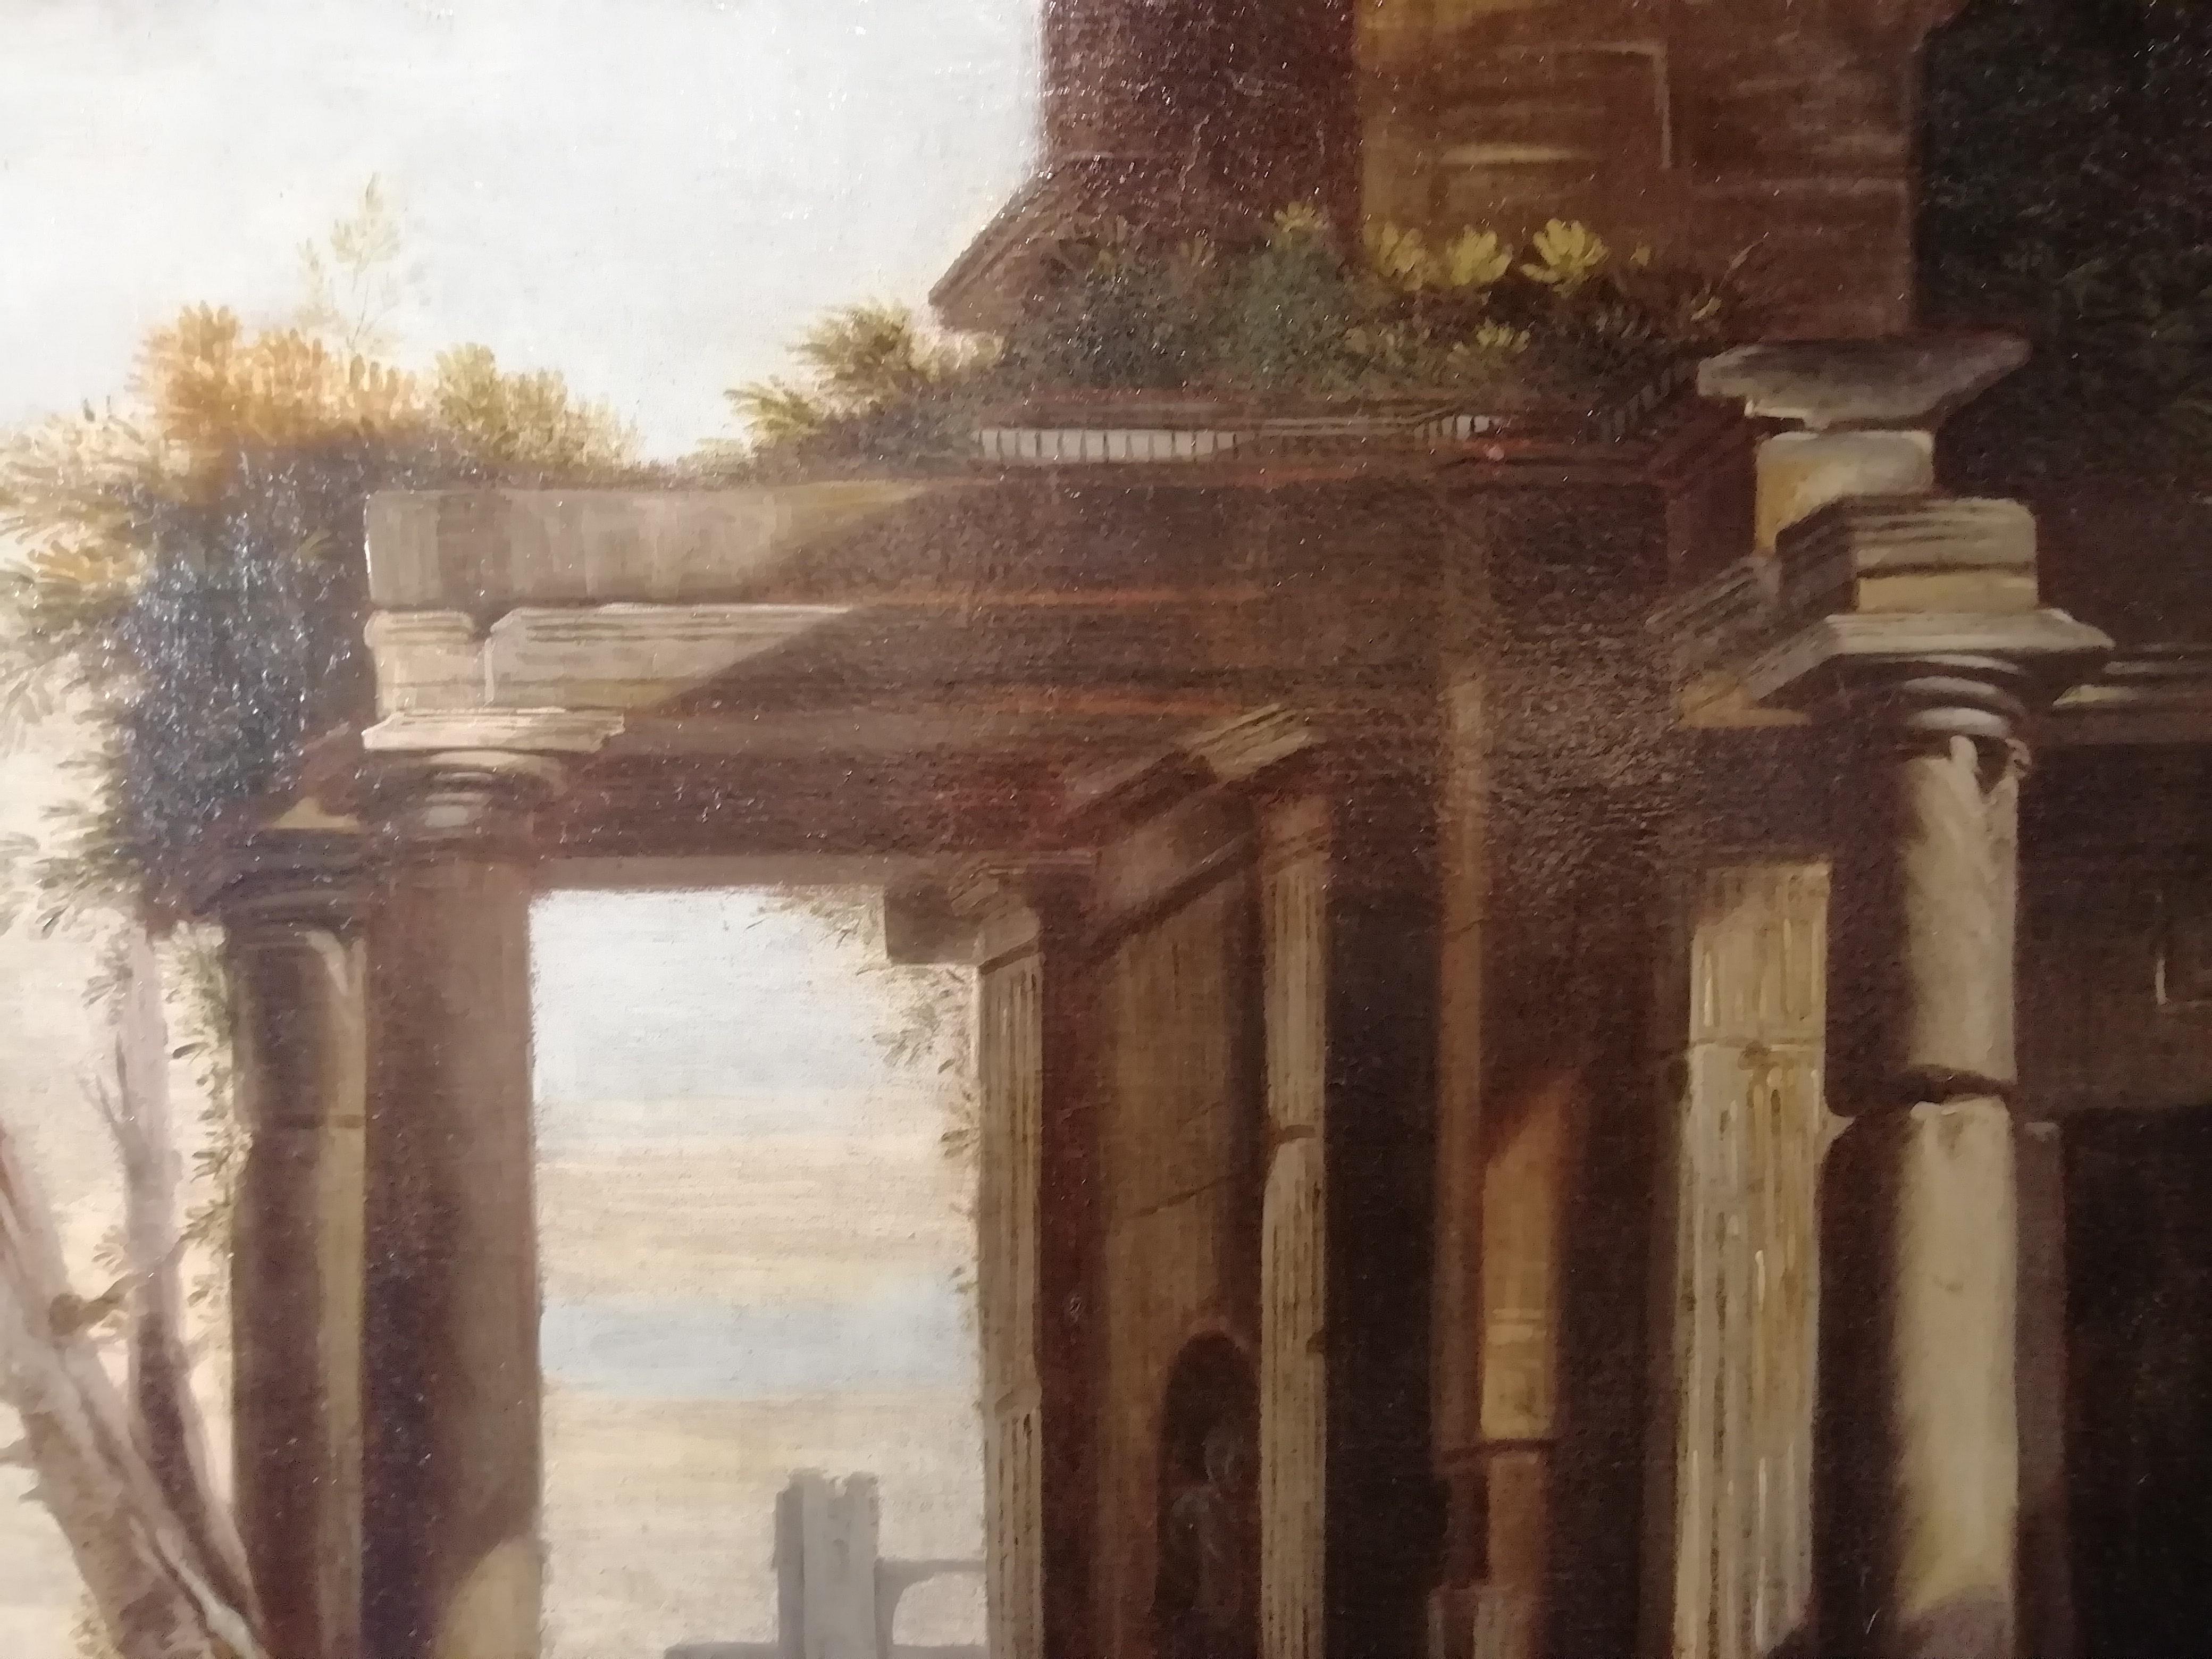 Canvas Landscape with Architecture and Ruins, Follower of G Ghisolfi Oil, Italian